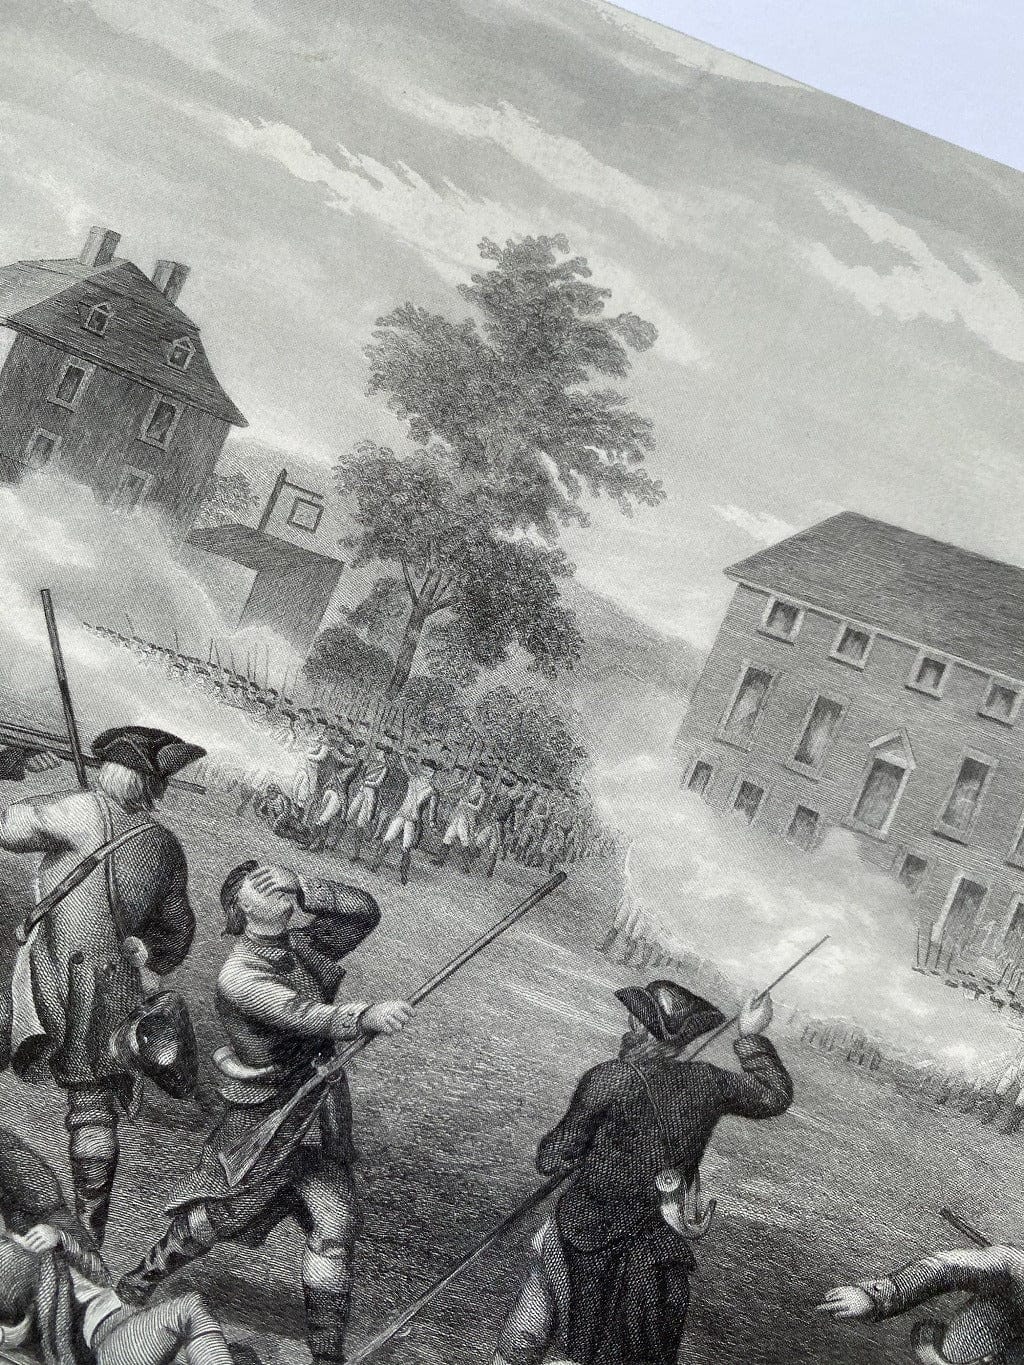 Closeup of the "Battle of Lexington 1775" Archival print from the History list store